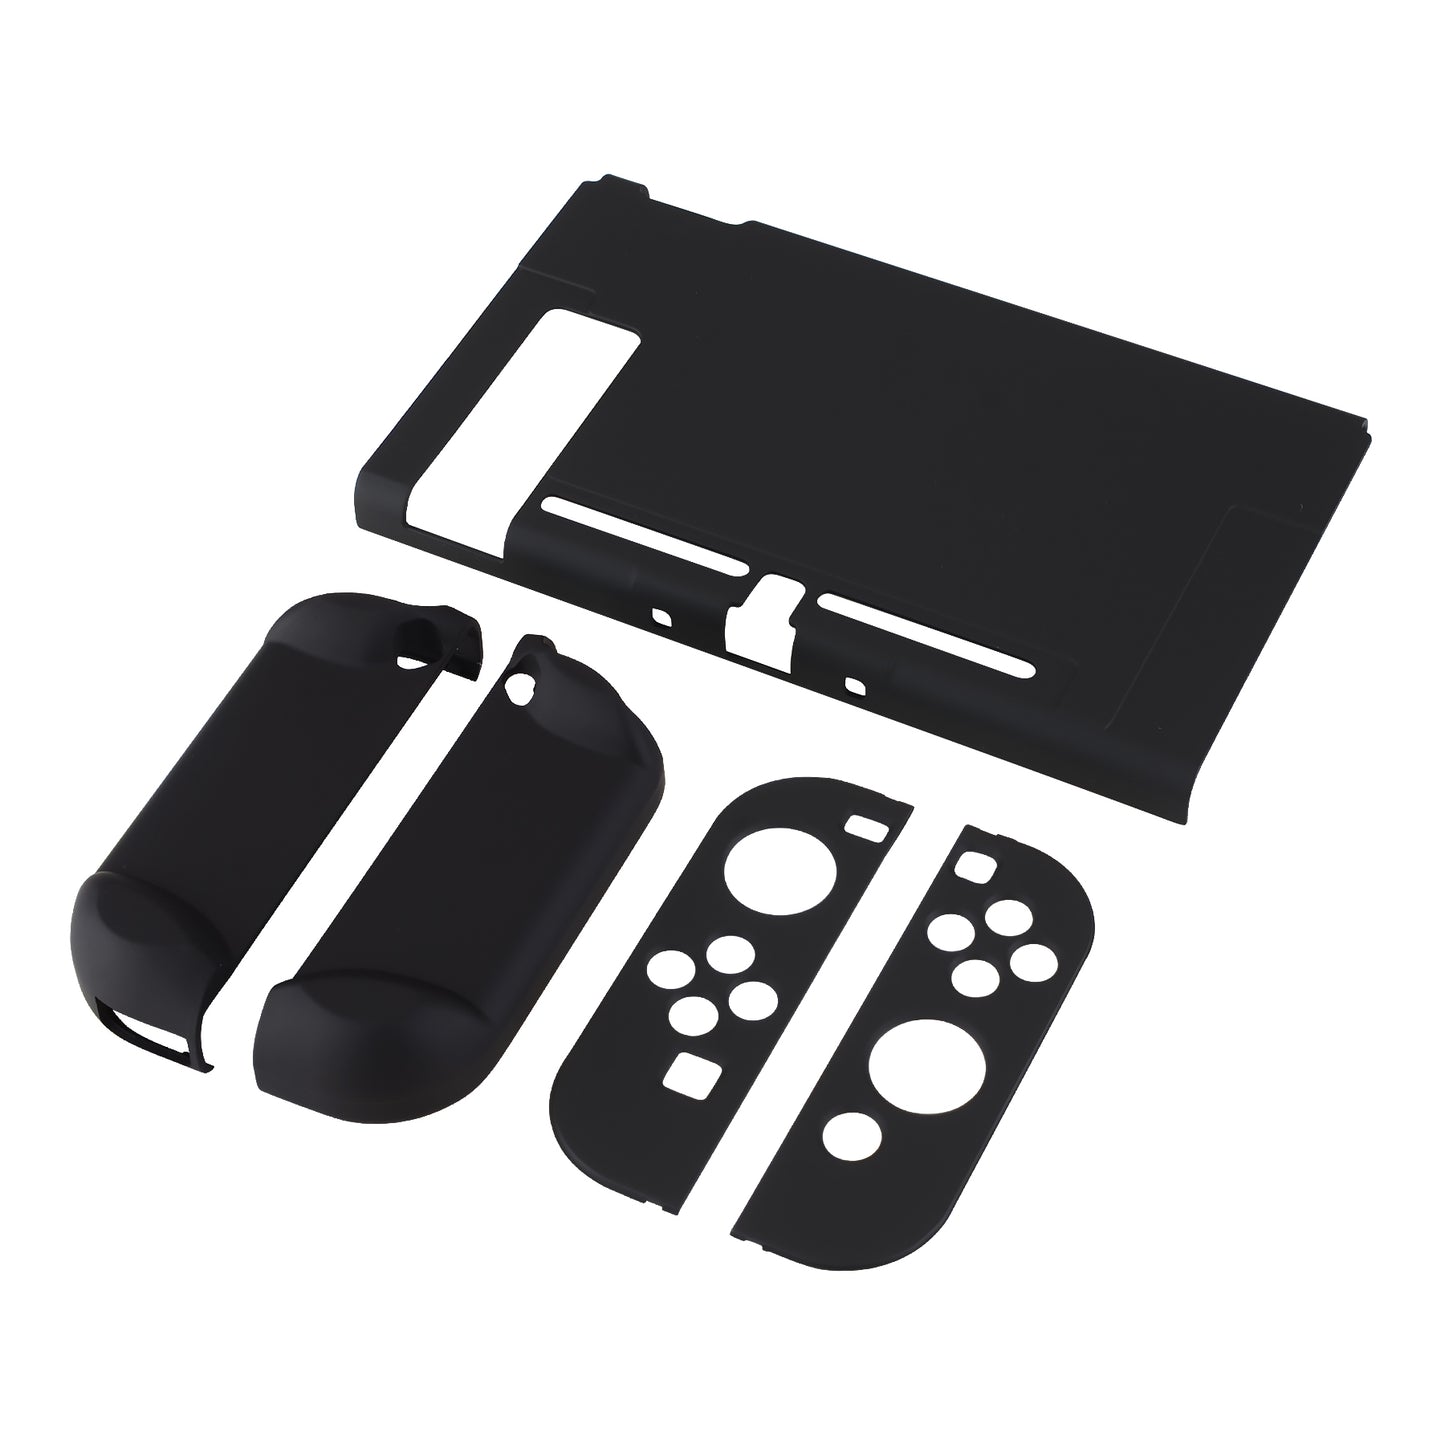 PlayVital Black Back Cover for Nintendo Switch Console, NS Joycon Handheld Controller Separable Protector Hard Shell, Soft Touch Customized Dockable Protective Case for Nintendo Switch - NTP344 PlayVital